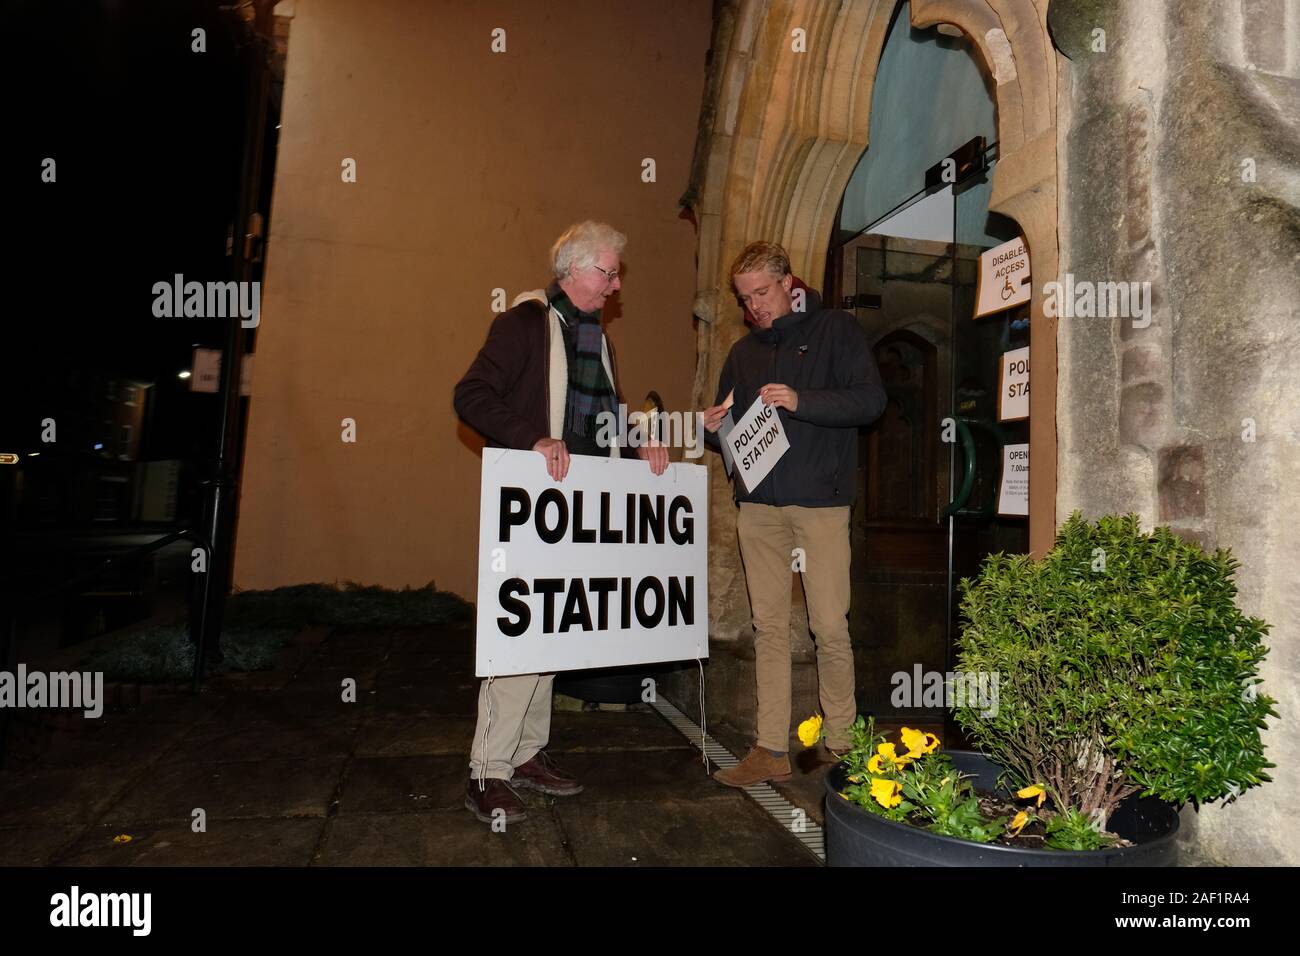 Hereford, Herefordshire, UK - Thursday 12th December 2019 - UK Election - Polling Station officials preparing a church in Hereford on a cold dark and wet winter morning just prior to the 7AM opening to voters. Photo Steven May / Alamy Live News Stock Photo